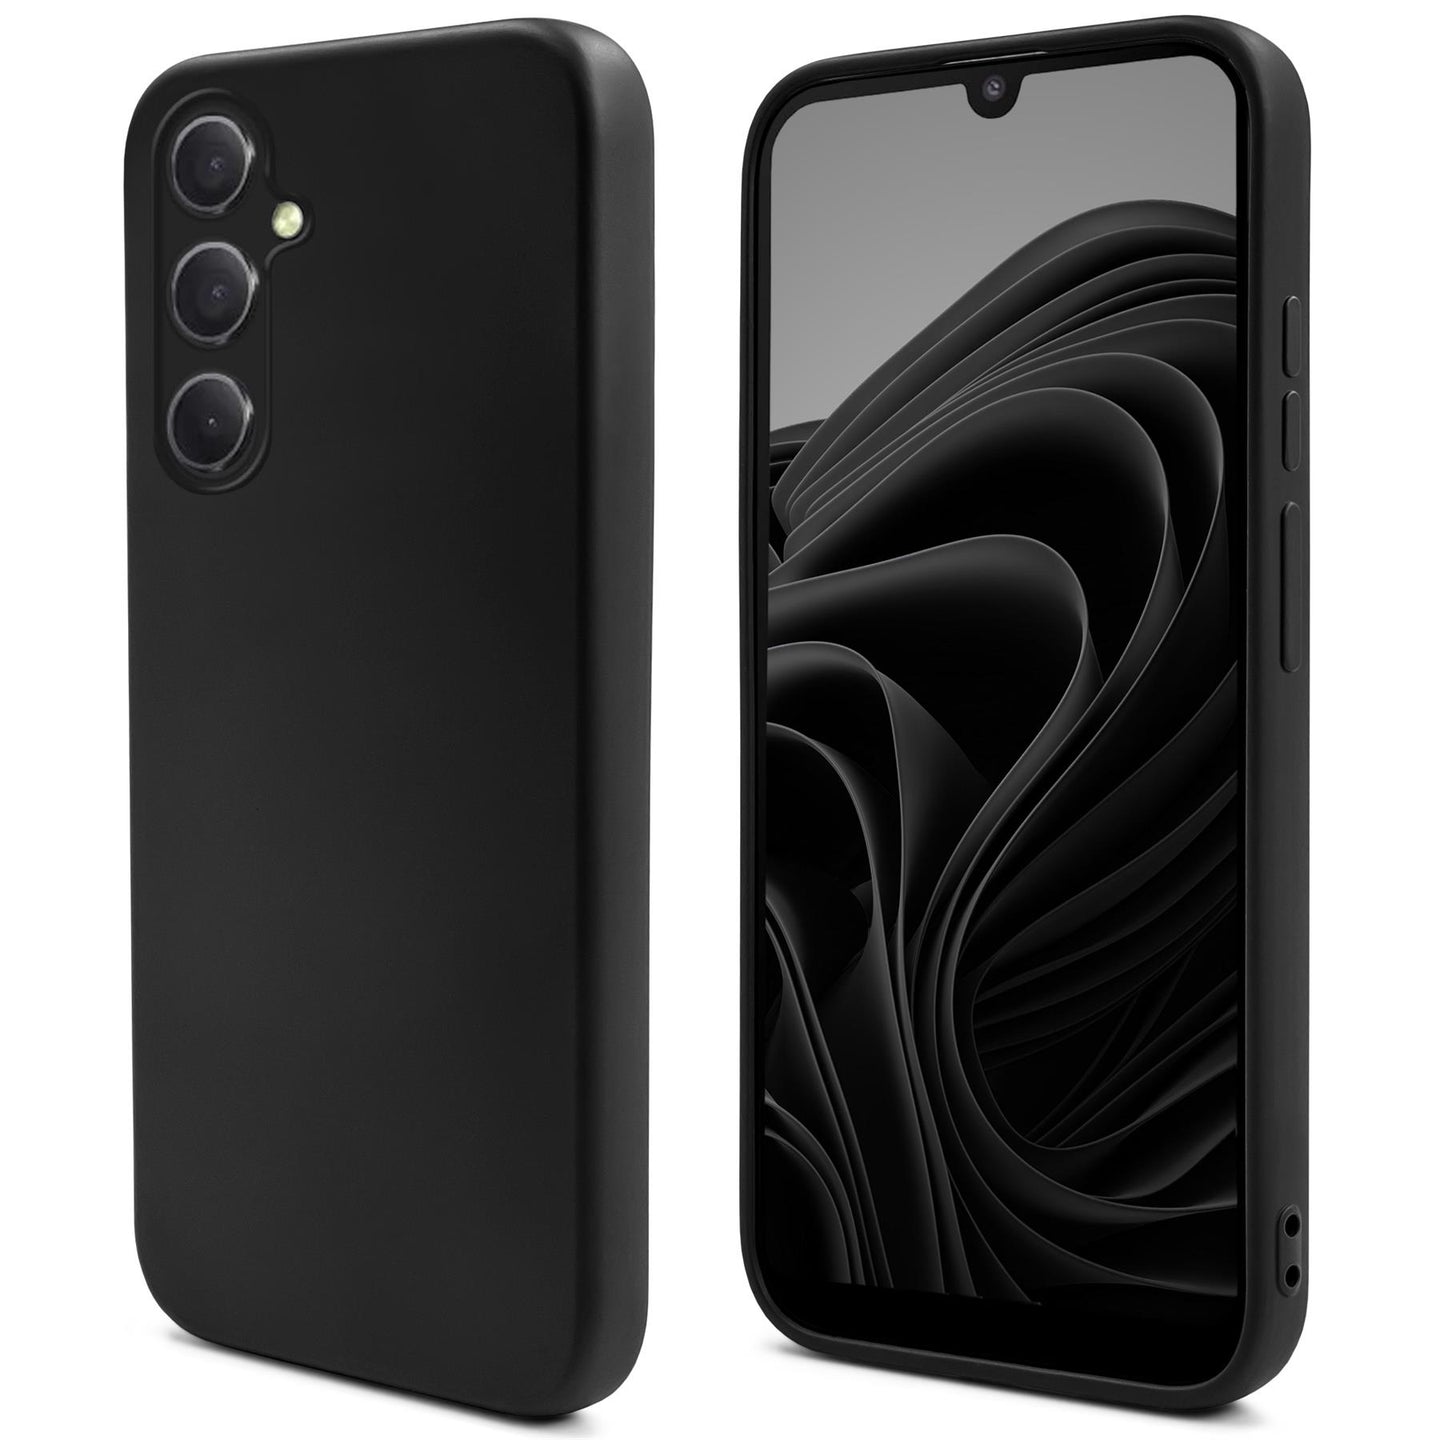 Moozy Lifestyle. Silicone Case for Samsung A34 5G, Black - Liquid Silicone Lightweight Cover with Matte Finish and Soft Microfiber Lining, Premium Silicone Case